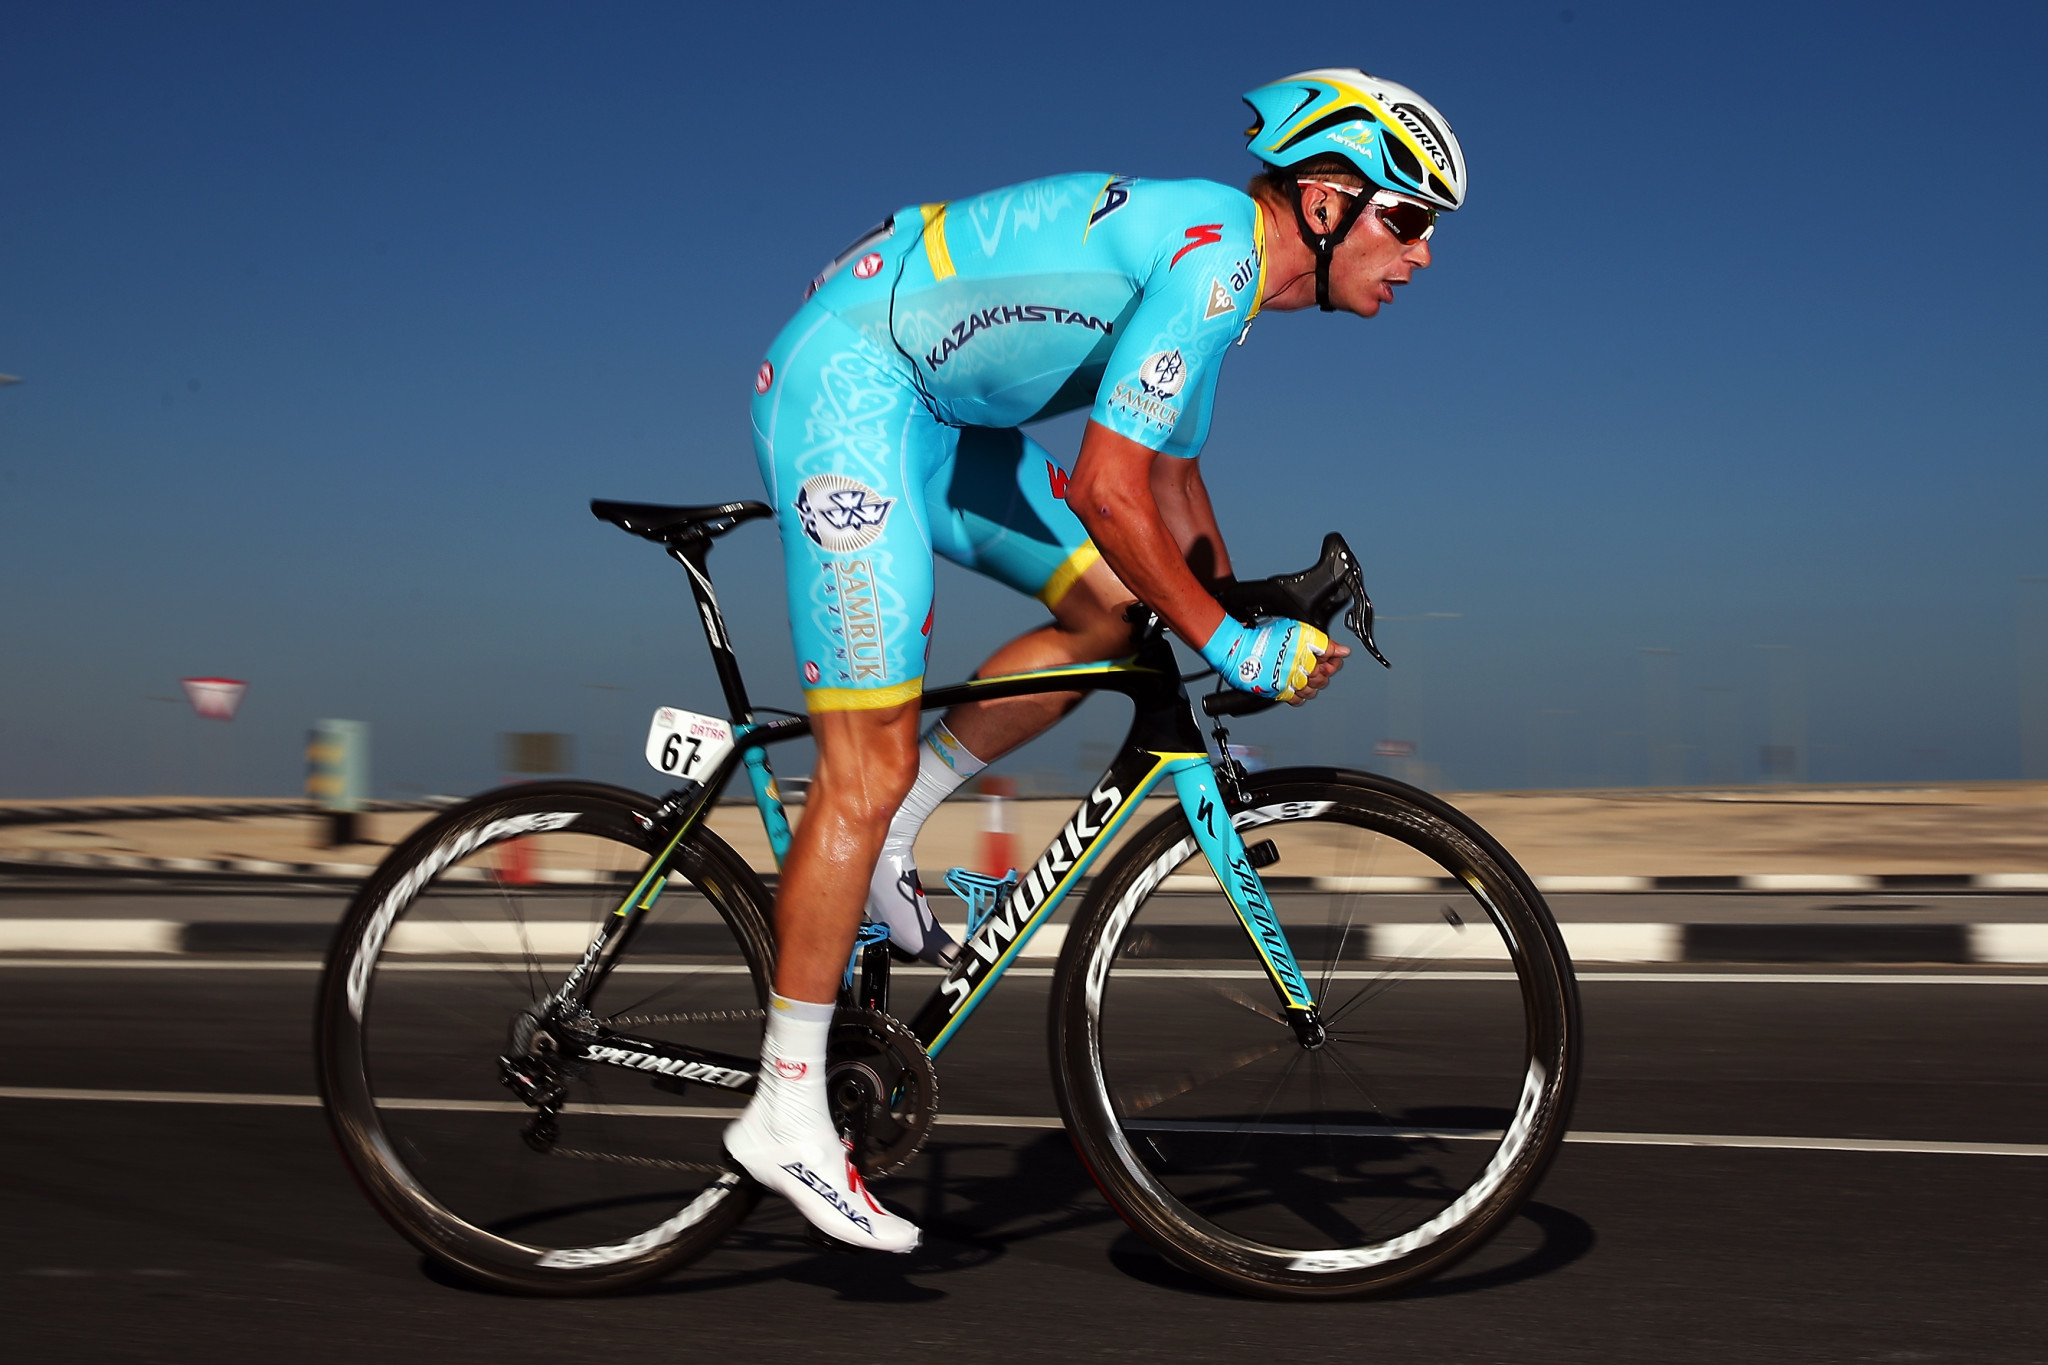 Astana have claimed they may pursue compensation from their former rider ©Getty Images